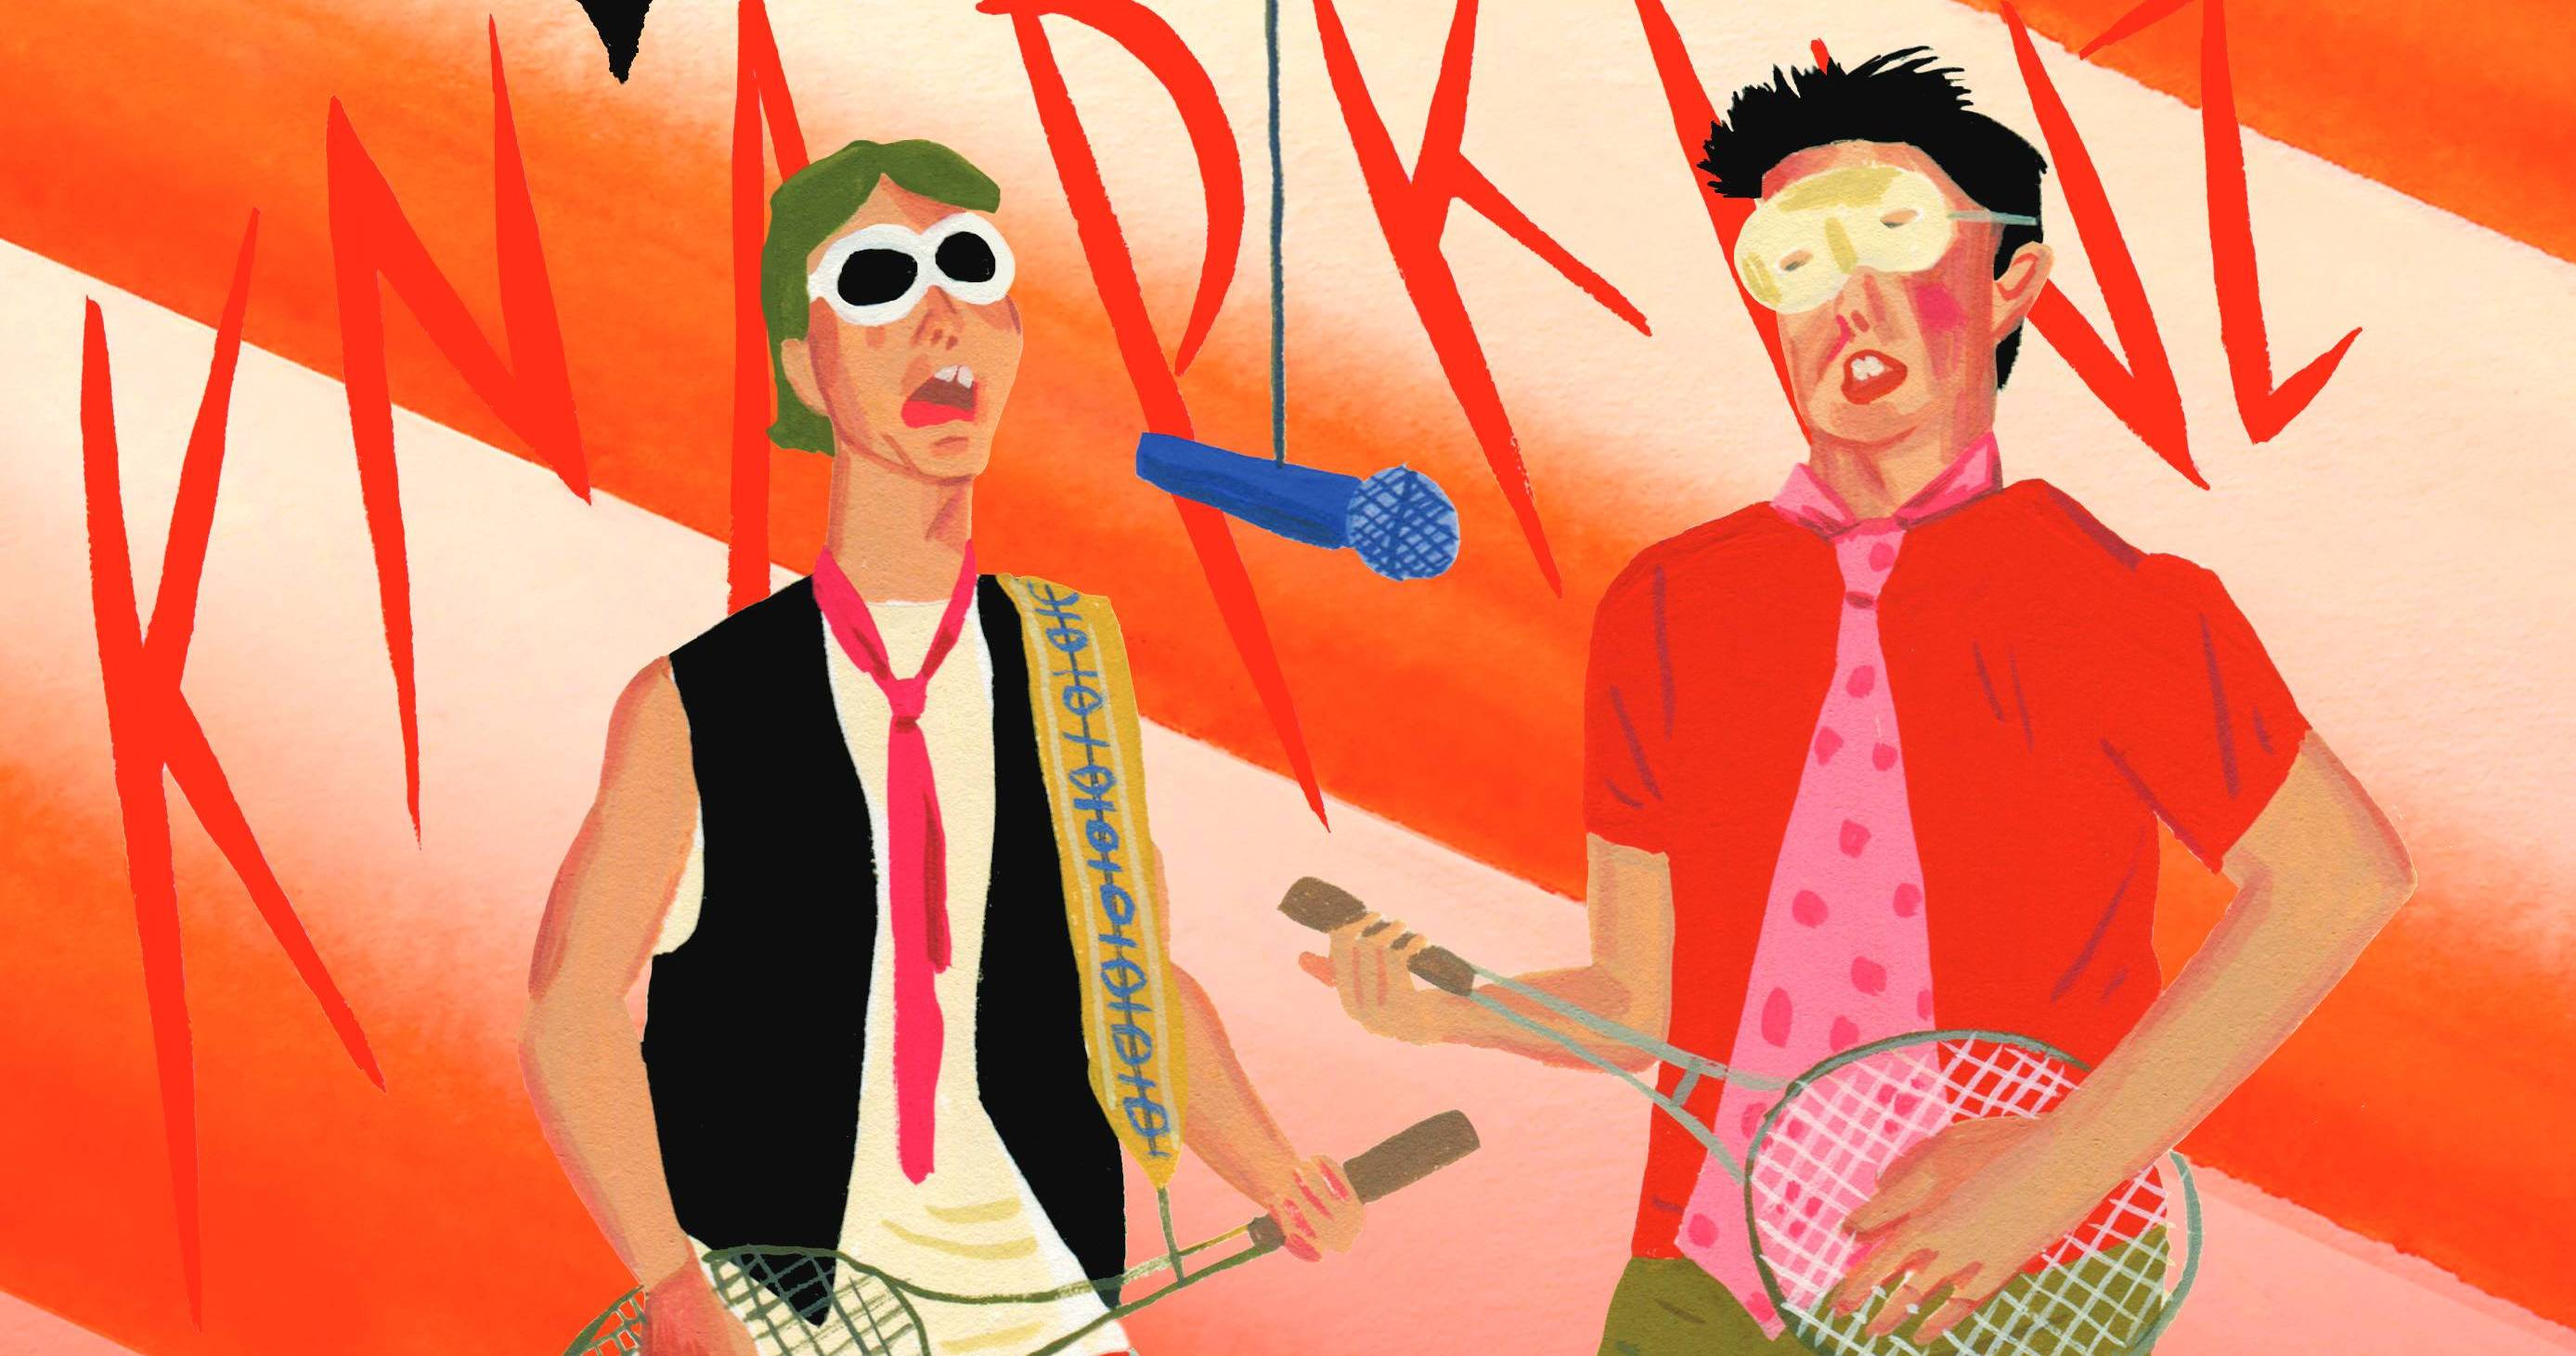 Illustrated image of two men dressed in T-shirts with ties and sunglasses using tennis racquets for guitars; the stylized word KNAPKINZ is in the background